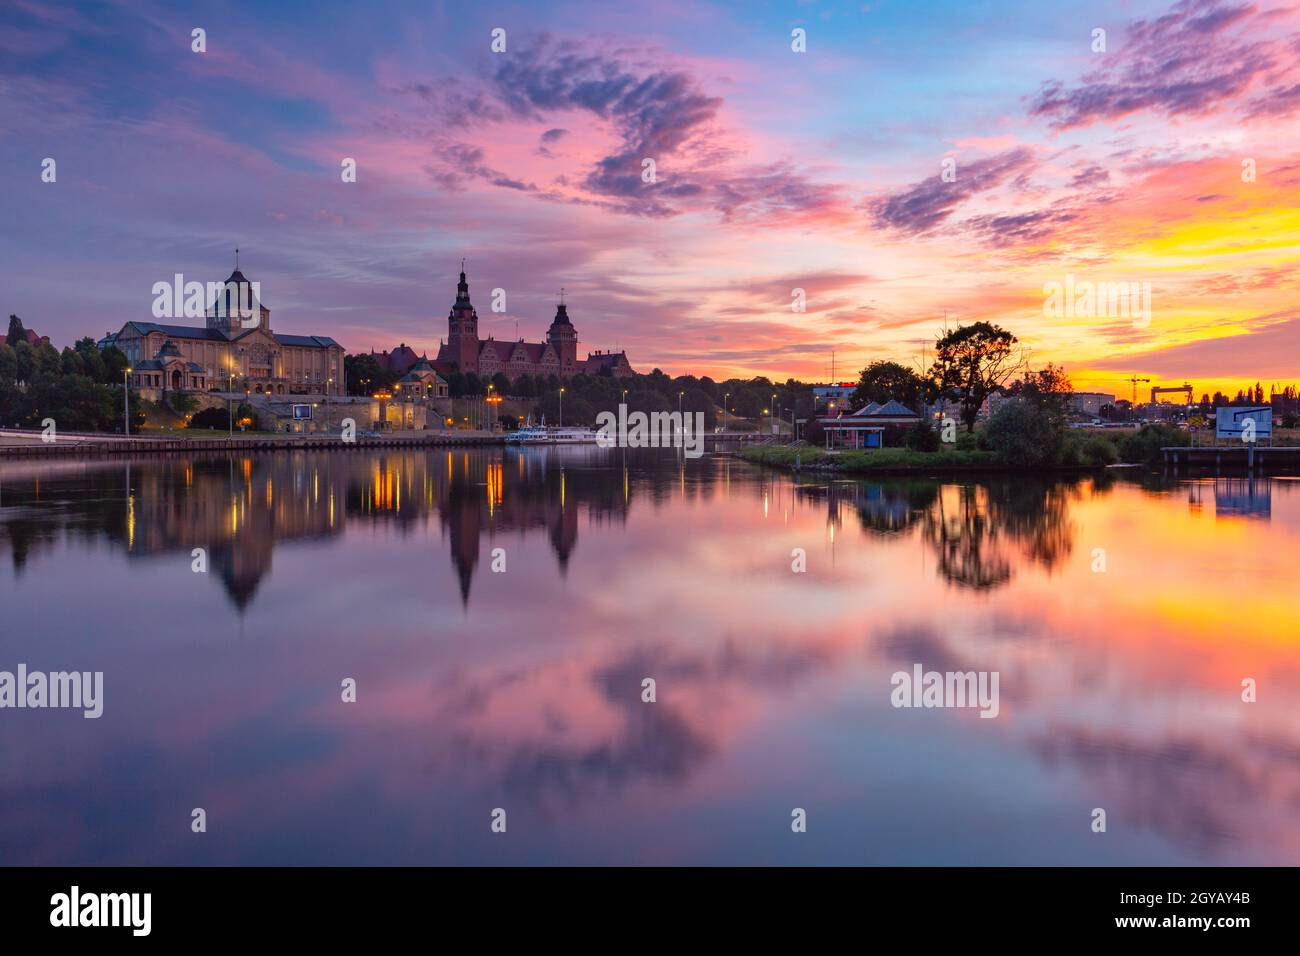 Panorama of Old town with reflection in river Oder at sunset, Szczecin, Poland Stock Photo